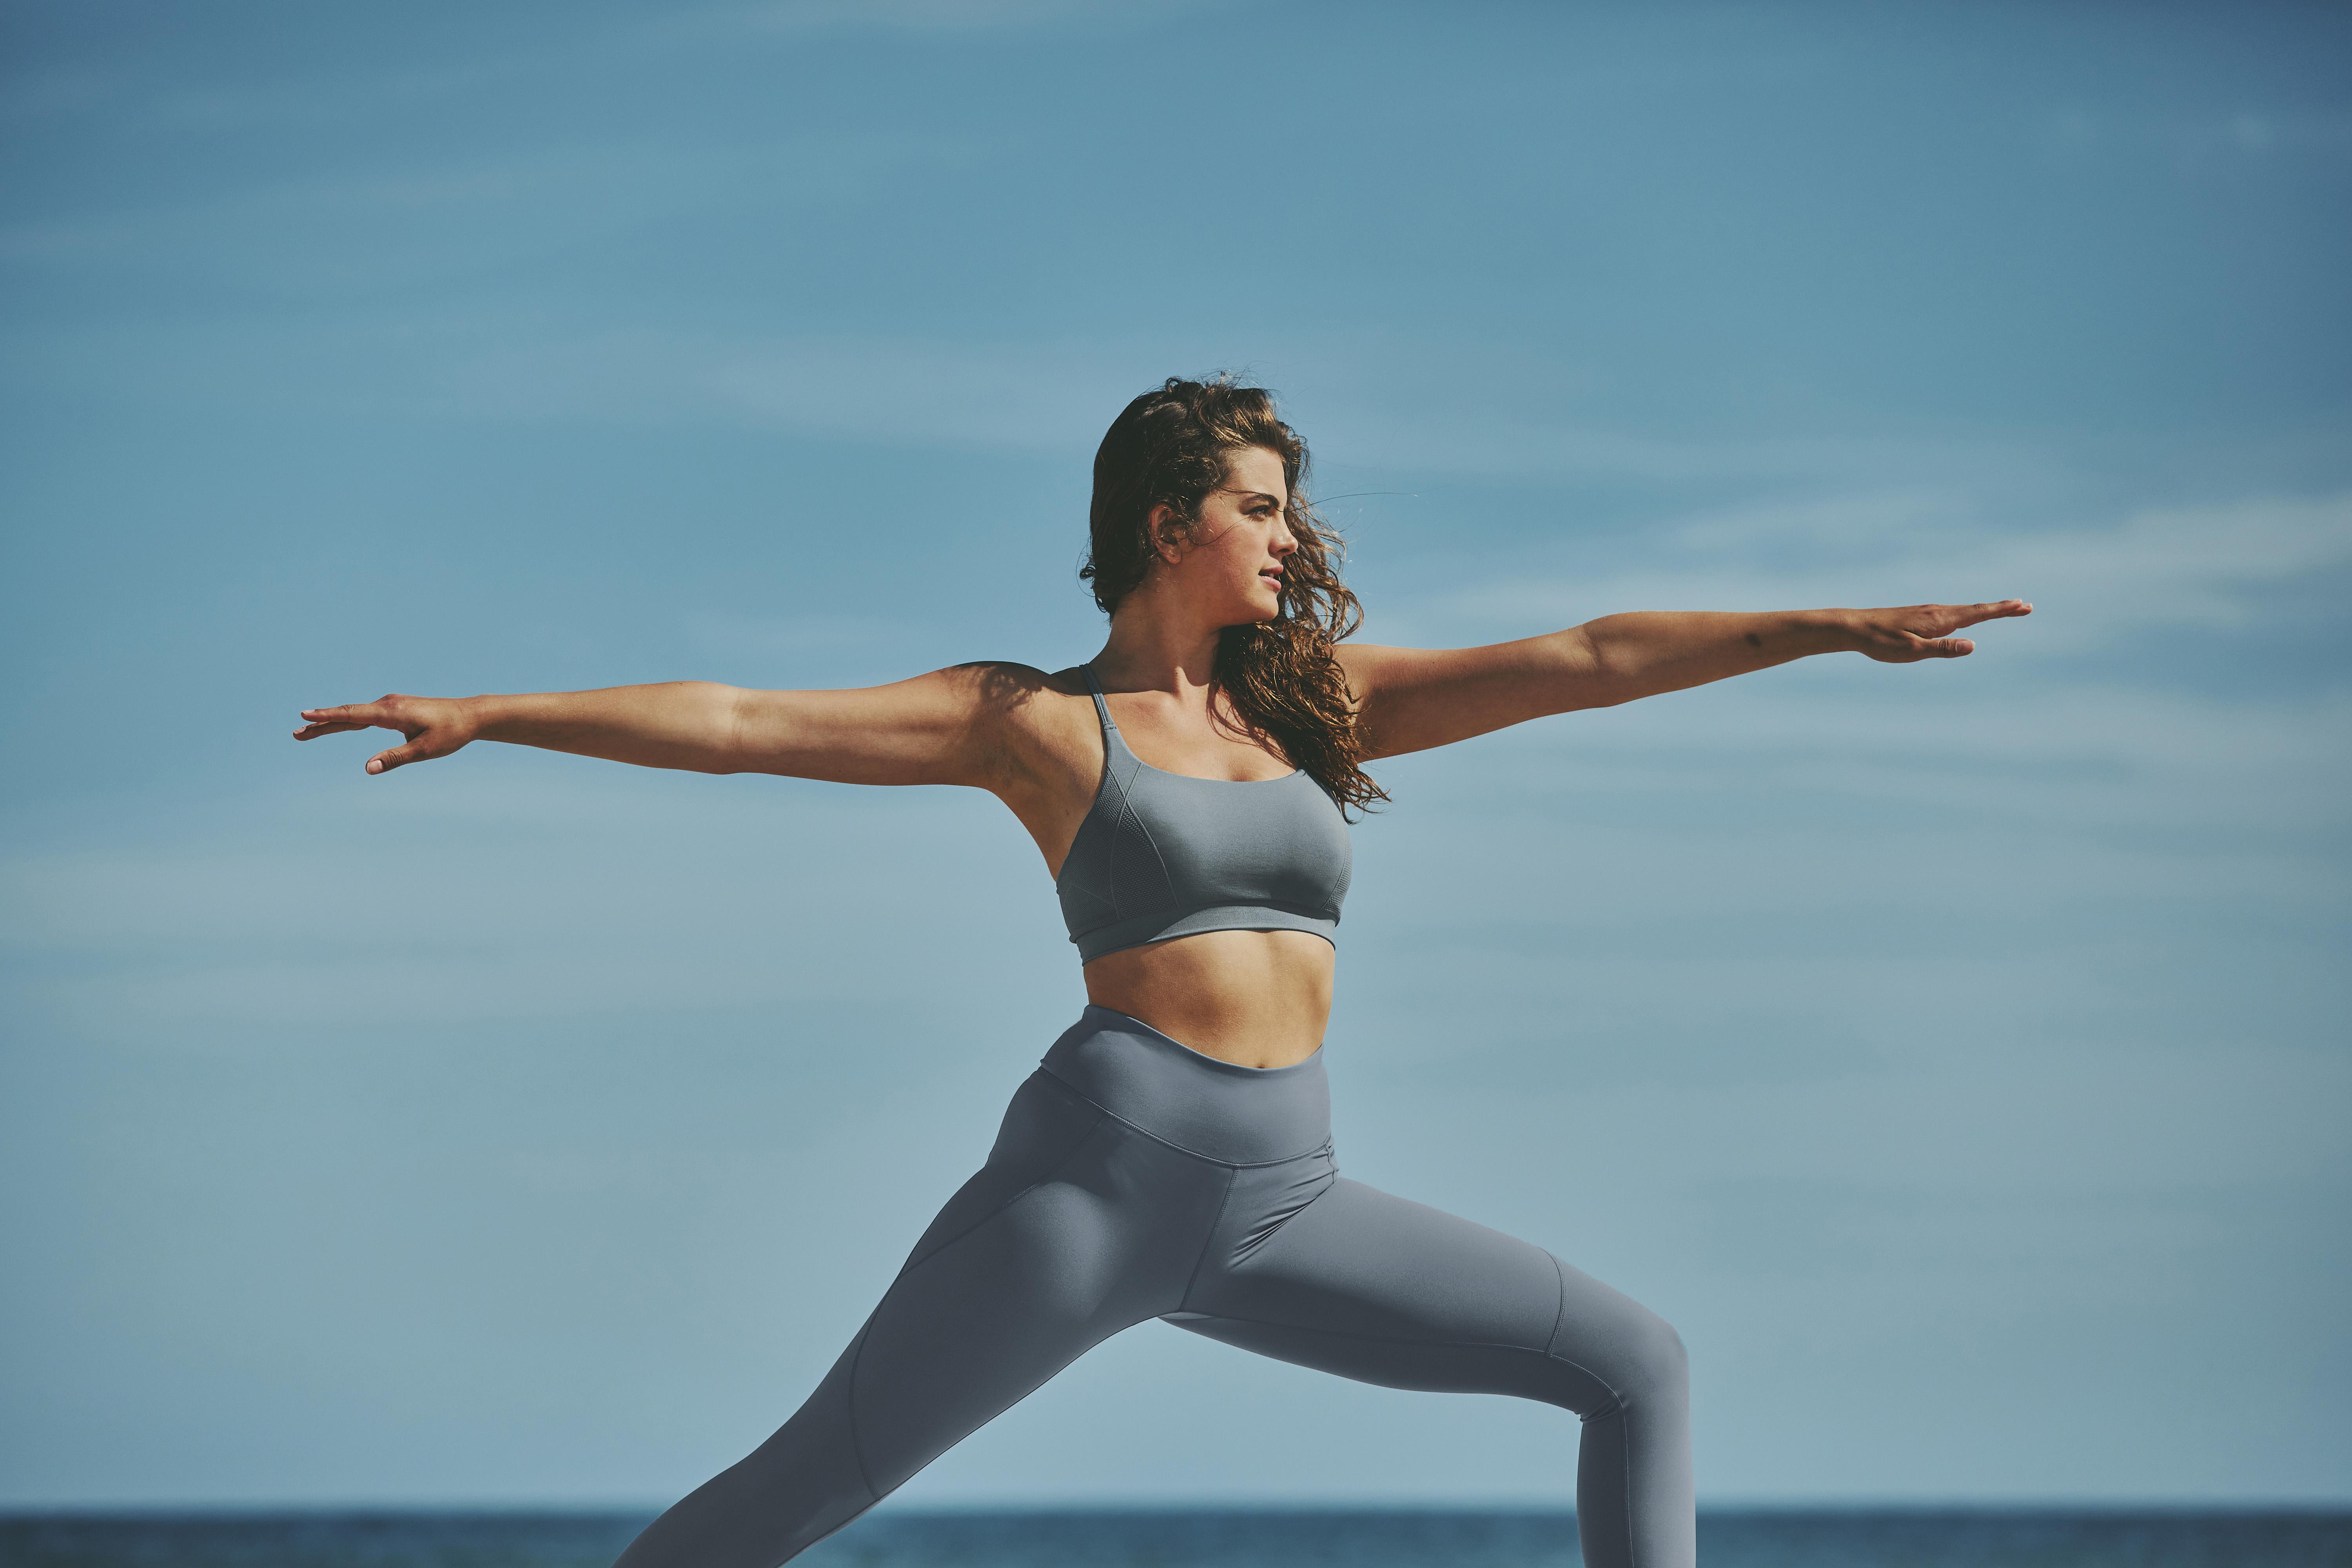 Big Welcome: Yoga on the roof terrace with Sweaty Betty